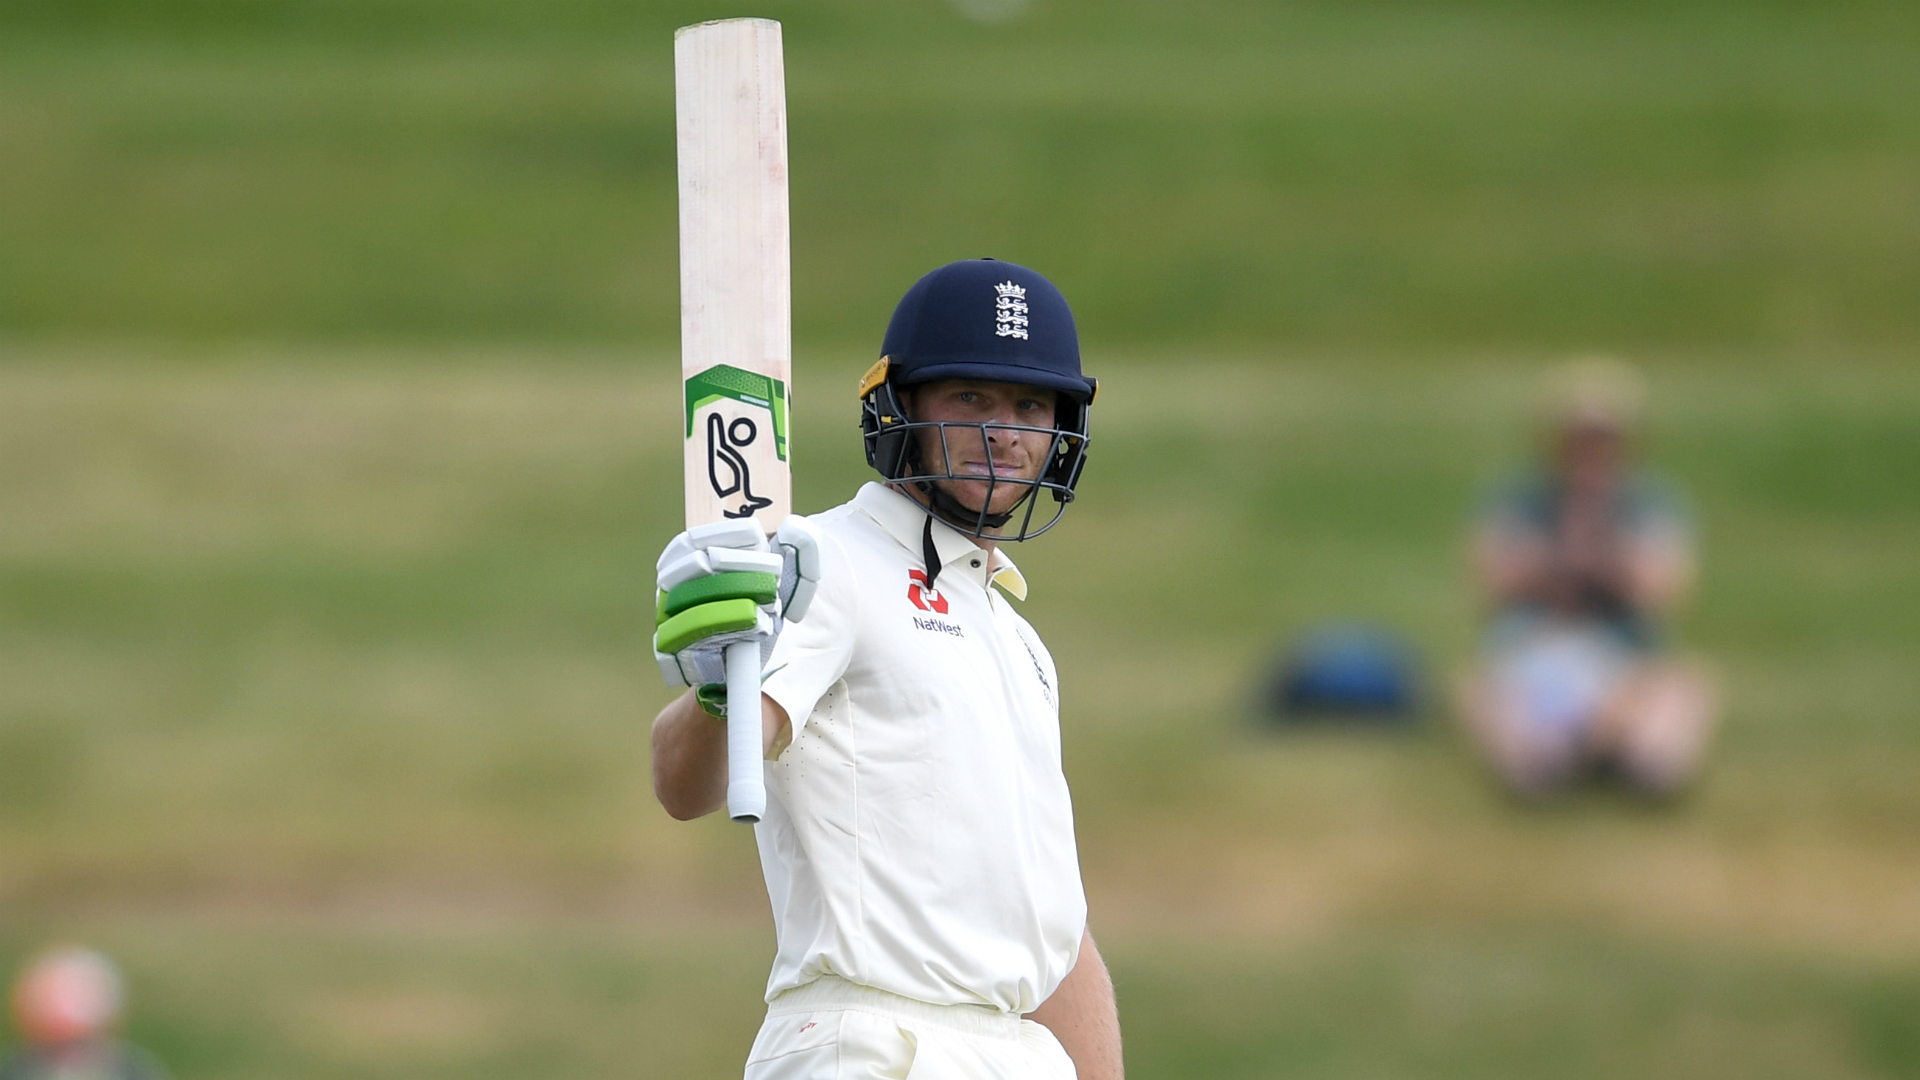 A busy English summer took its tool, but Jos Buttler is refreshed and raring to go for the two-Test series in New Zealand.